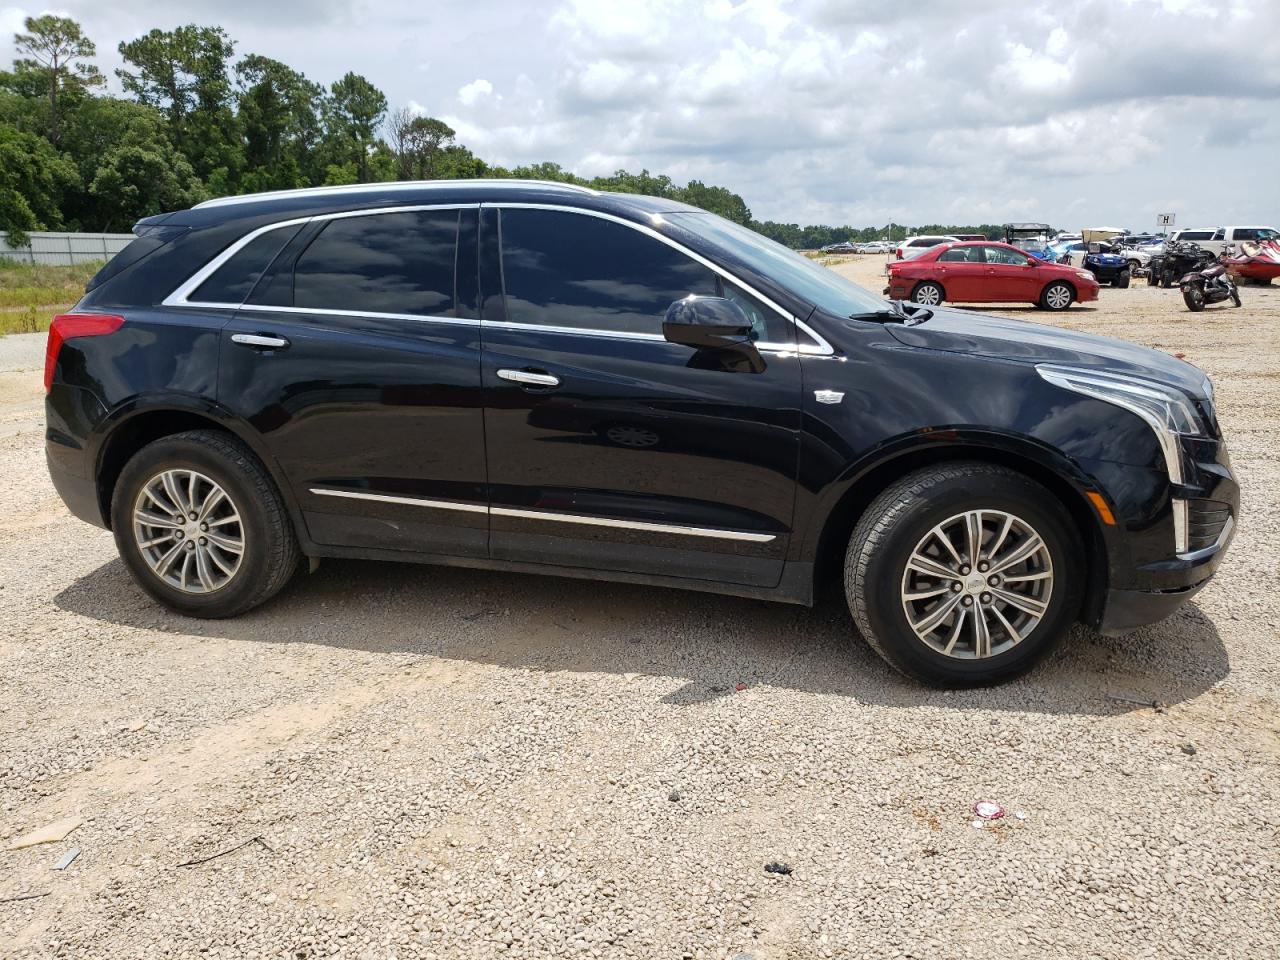 1GYKNBRS6HZ****** Salvage and Wrecked 2017 Cadillac XT5 in Alabama State